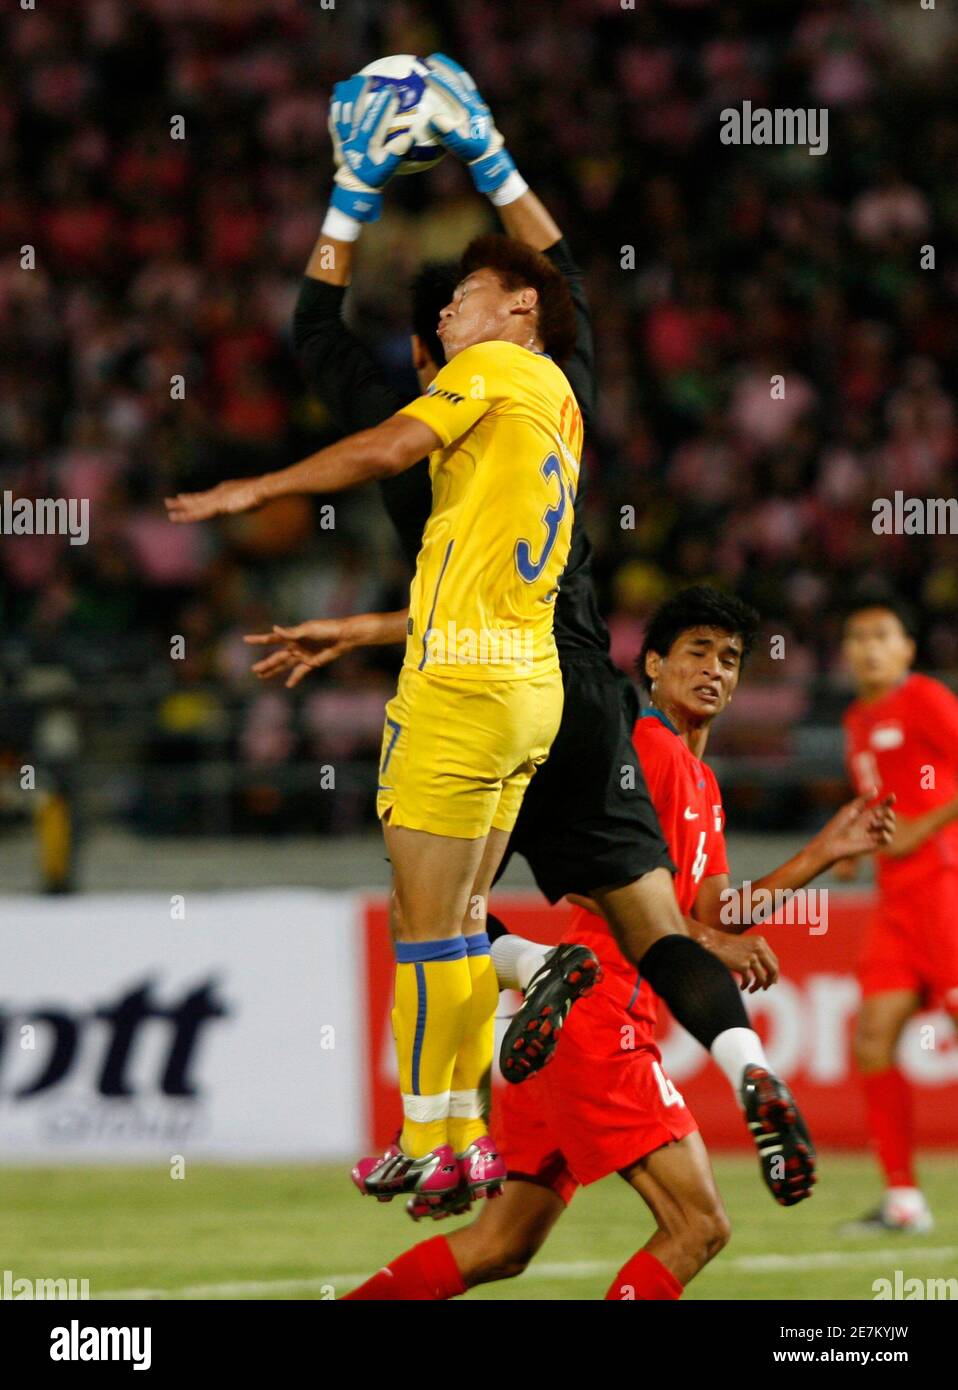 Thailand S Kirati Kaewsombut Yellow Fights For The Ball With Singapore S Goalkeeper Hassan Sunny During Their Thailand King S Cup Football Tournament At His Majesty The 80th Birthday Anniversary Stadium In Nakhon Ratchasima Province